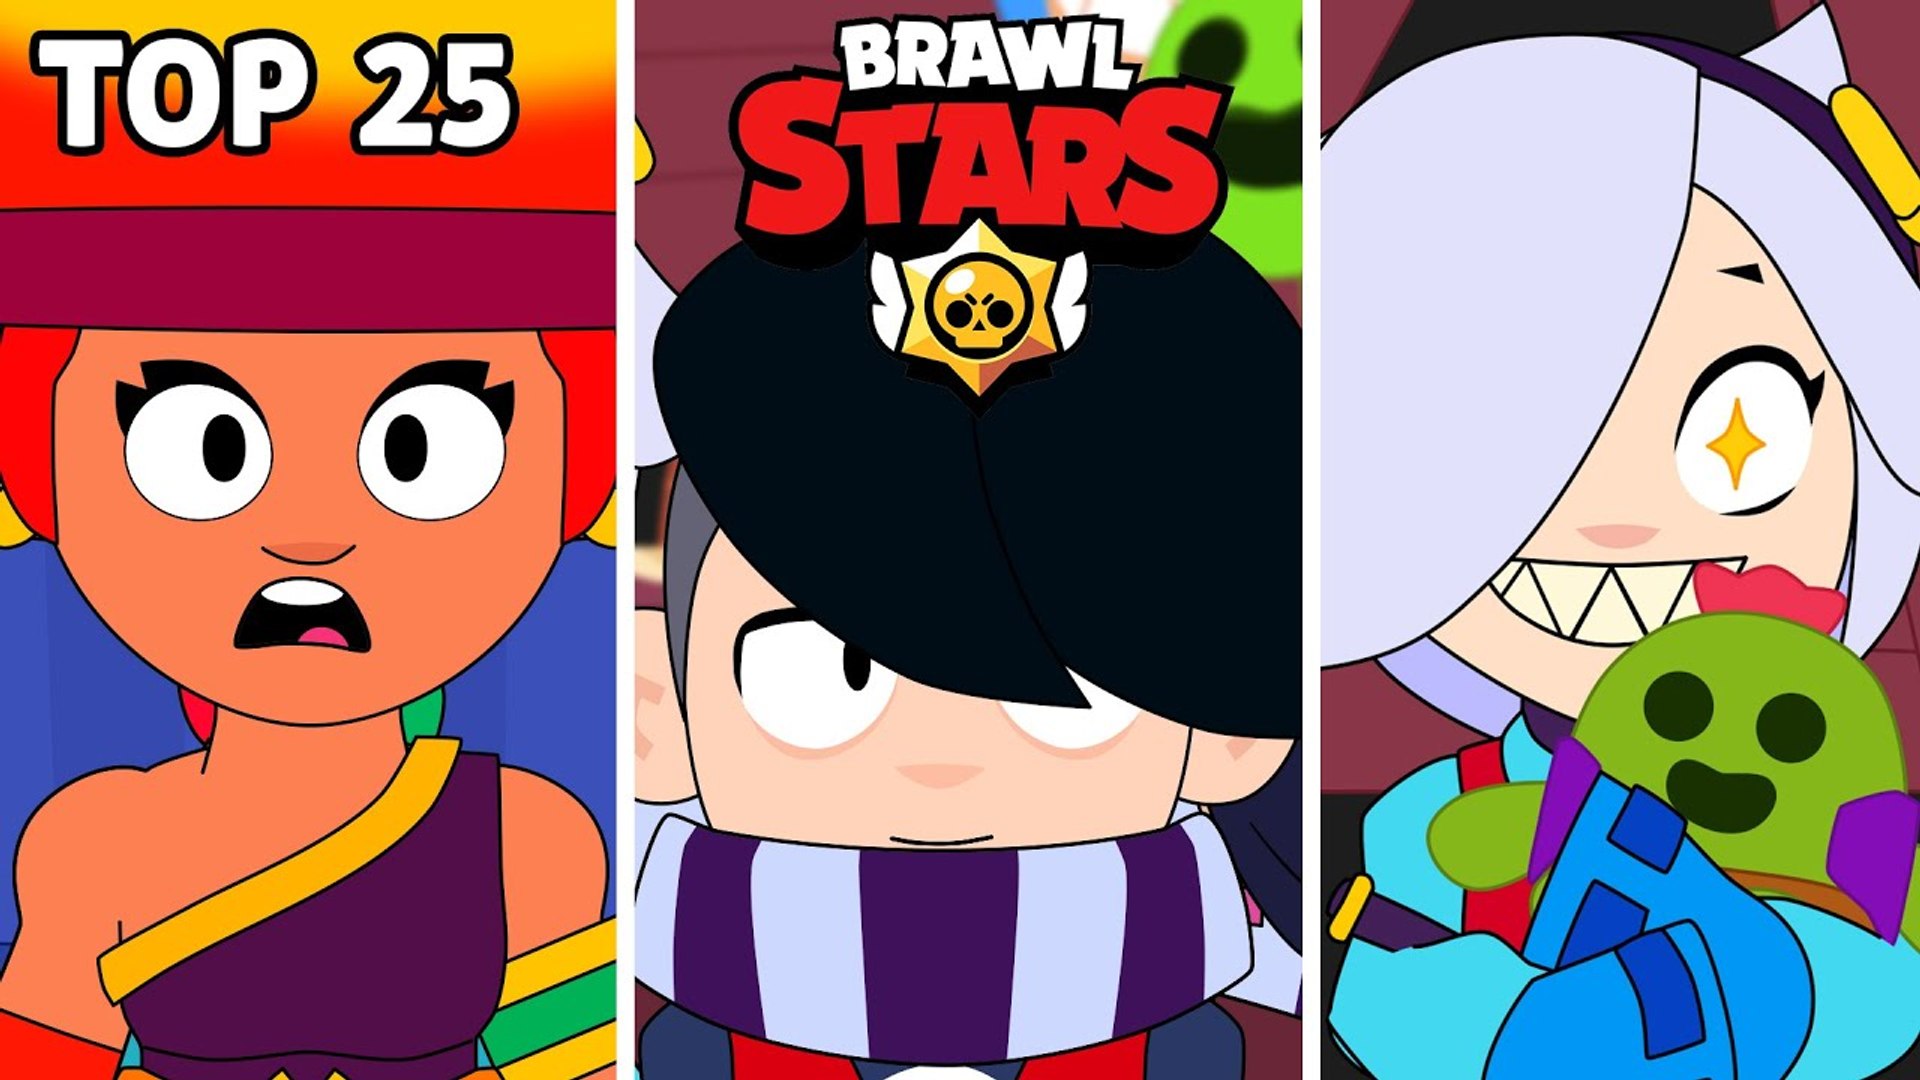 Top 25 Best Brawl Stars Animations Compilation By Gumymation Video Dailymotion - brawl stars animation hd